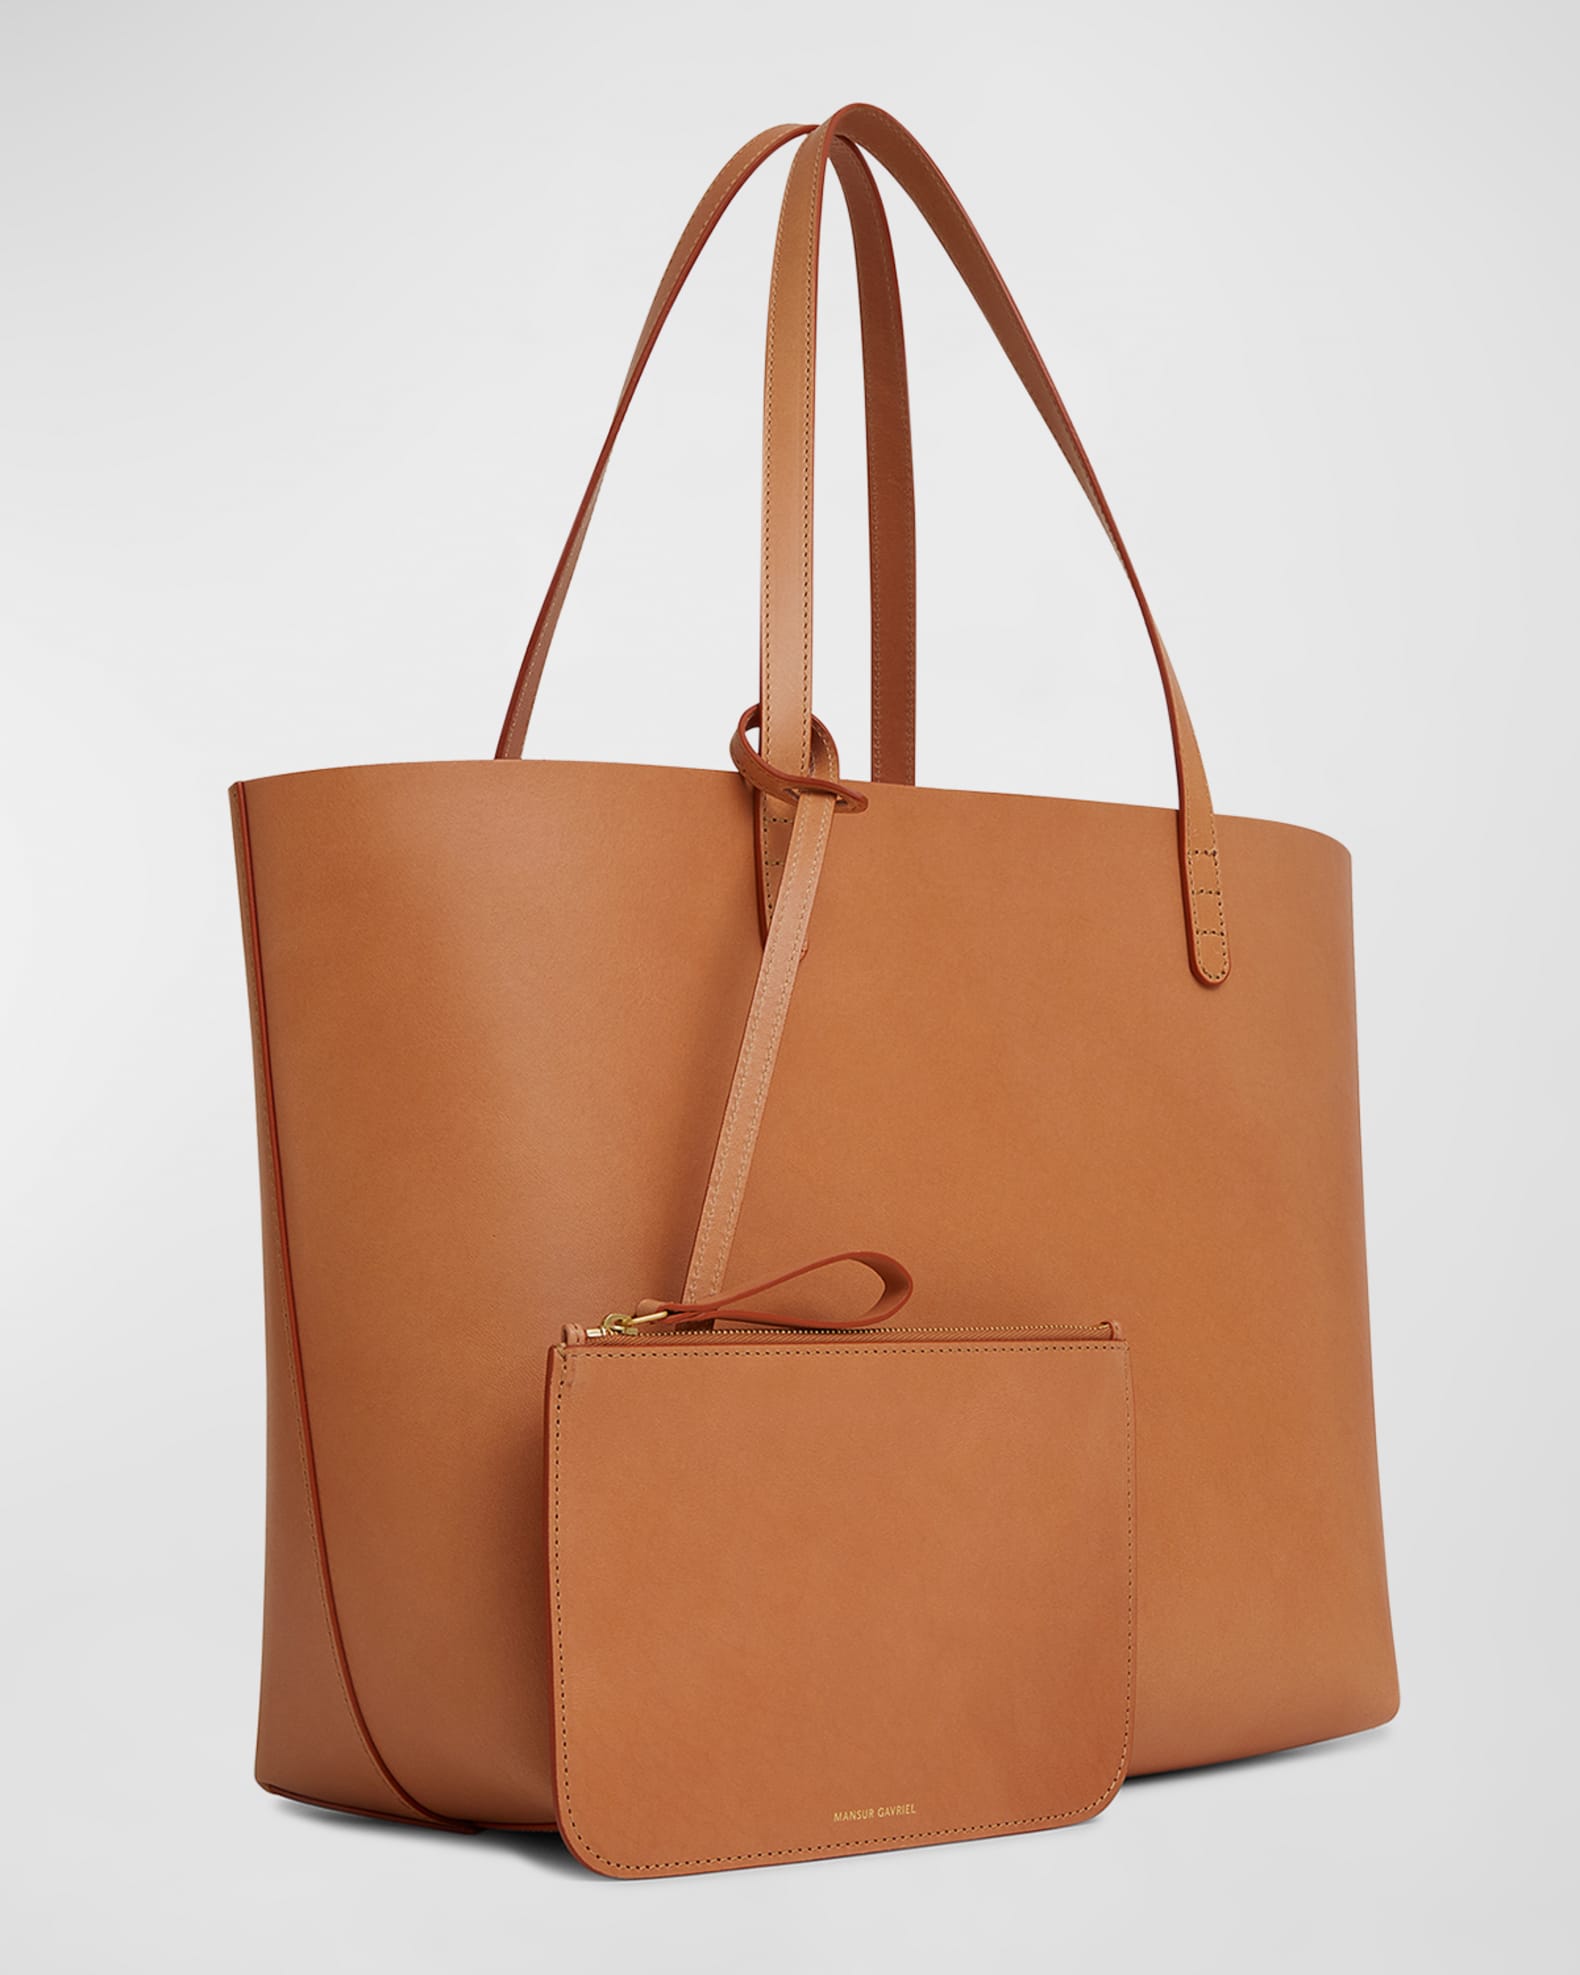 Pretty leather handbags are 40% off at the Mansur Gavriel summer sale